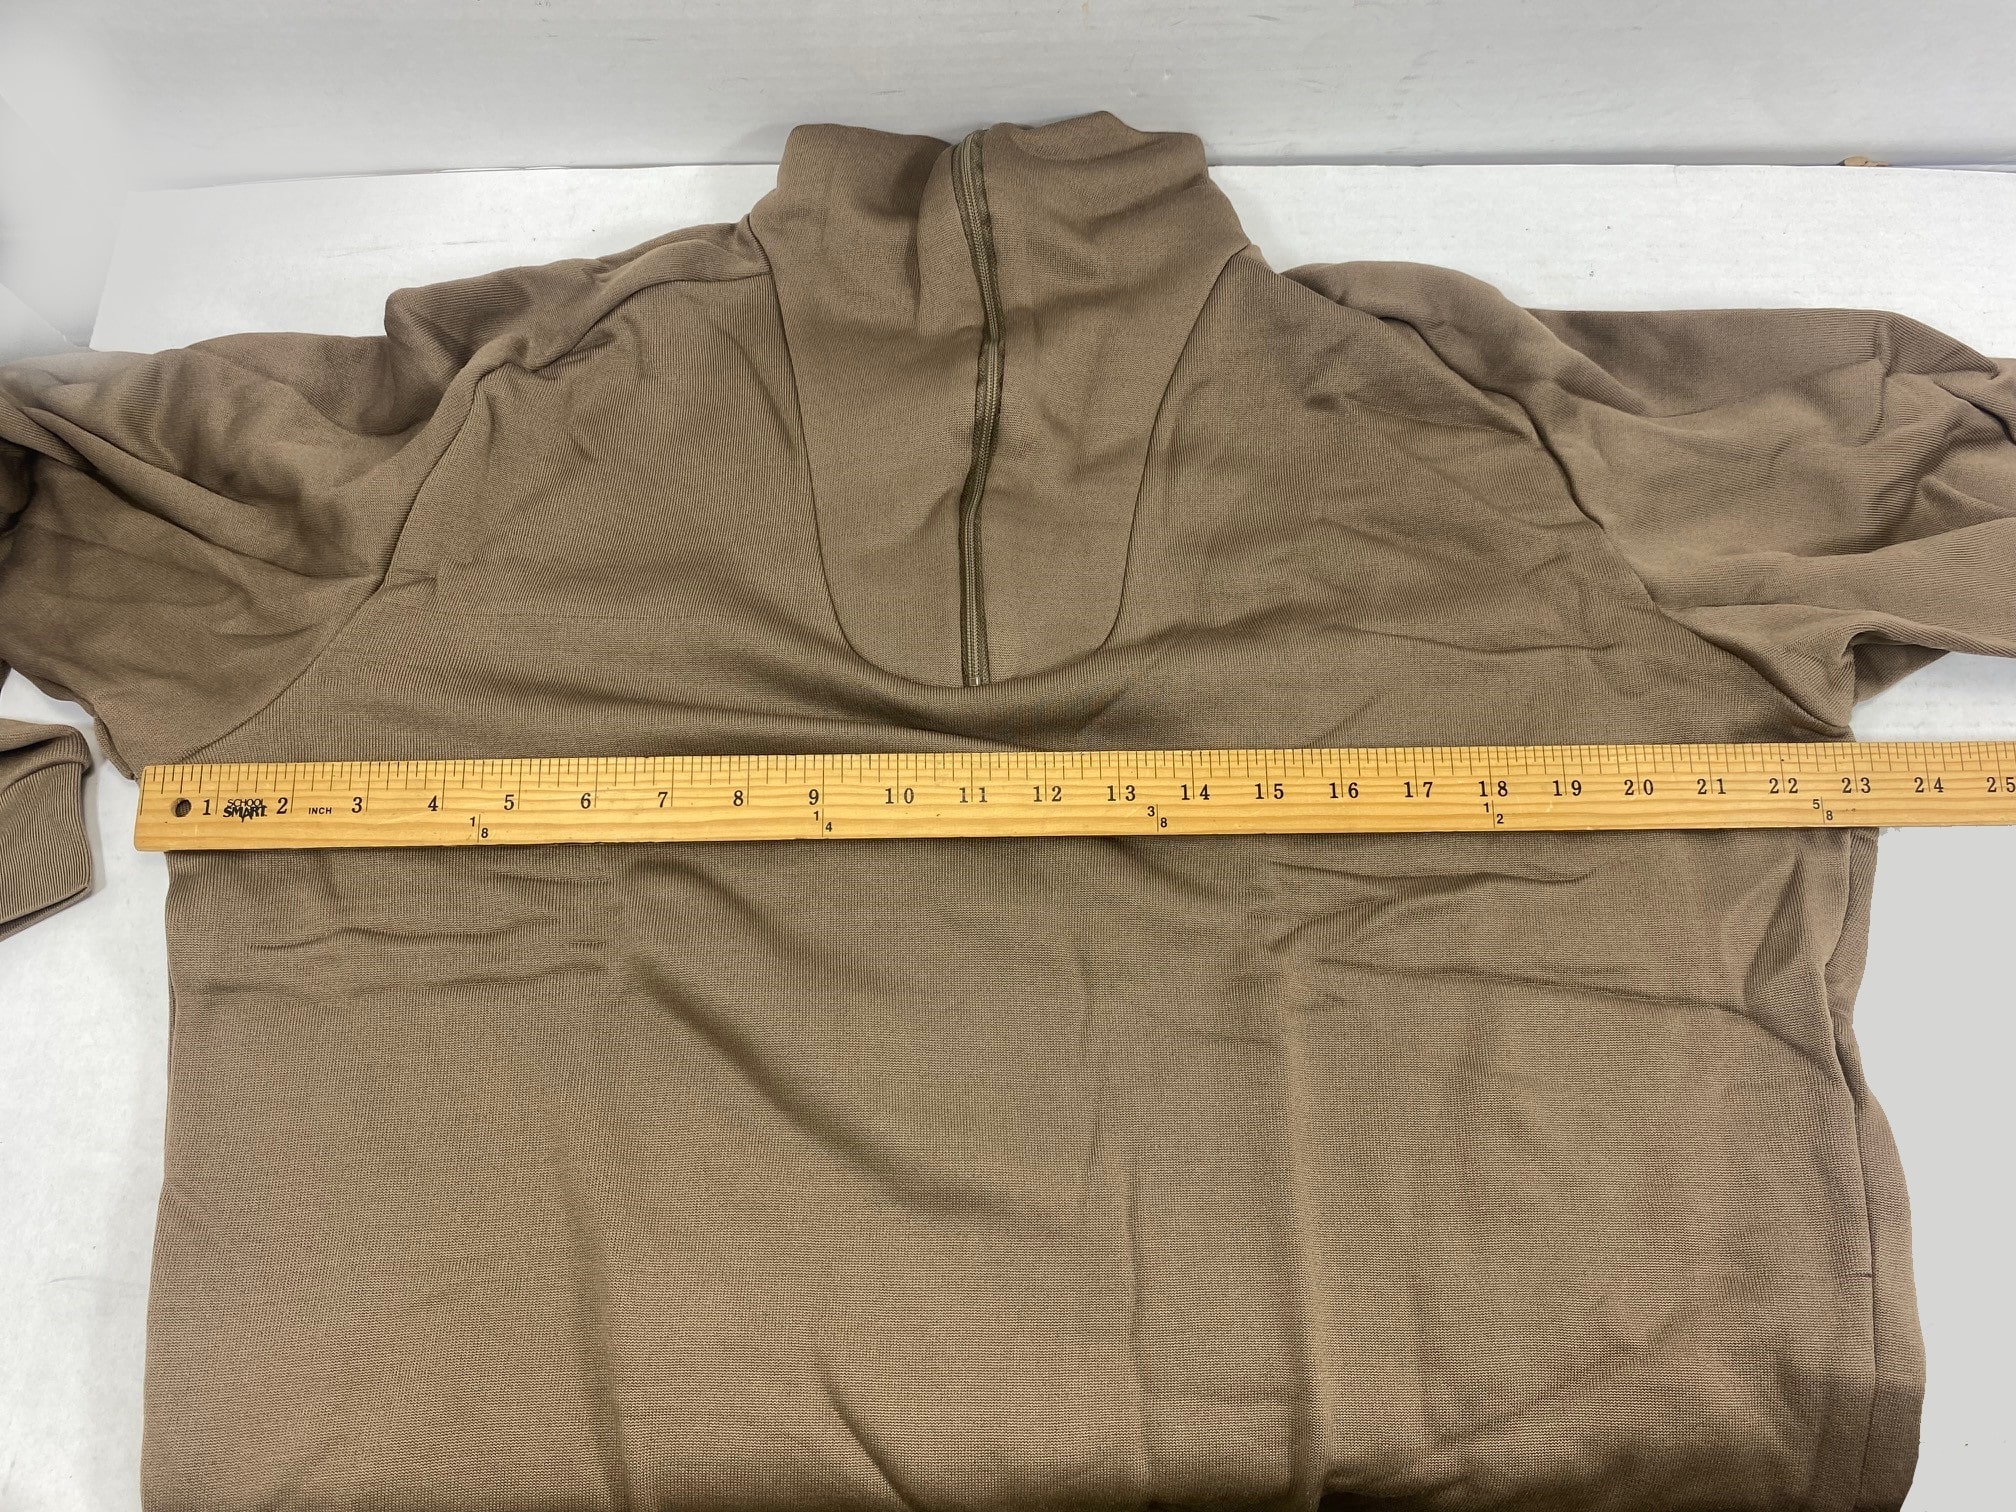 Polypro Thermals, Top. Brown size Large, New - Omahas Army Navy Surplus